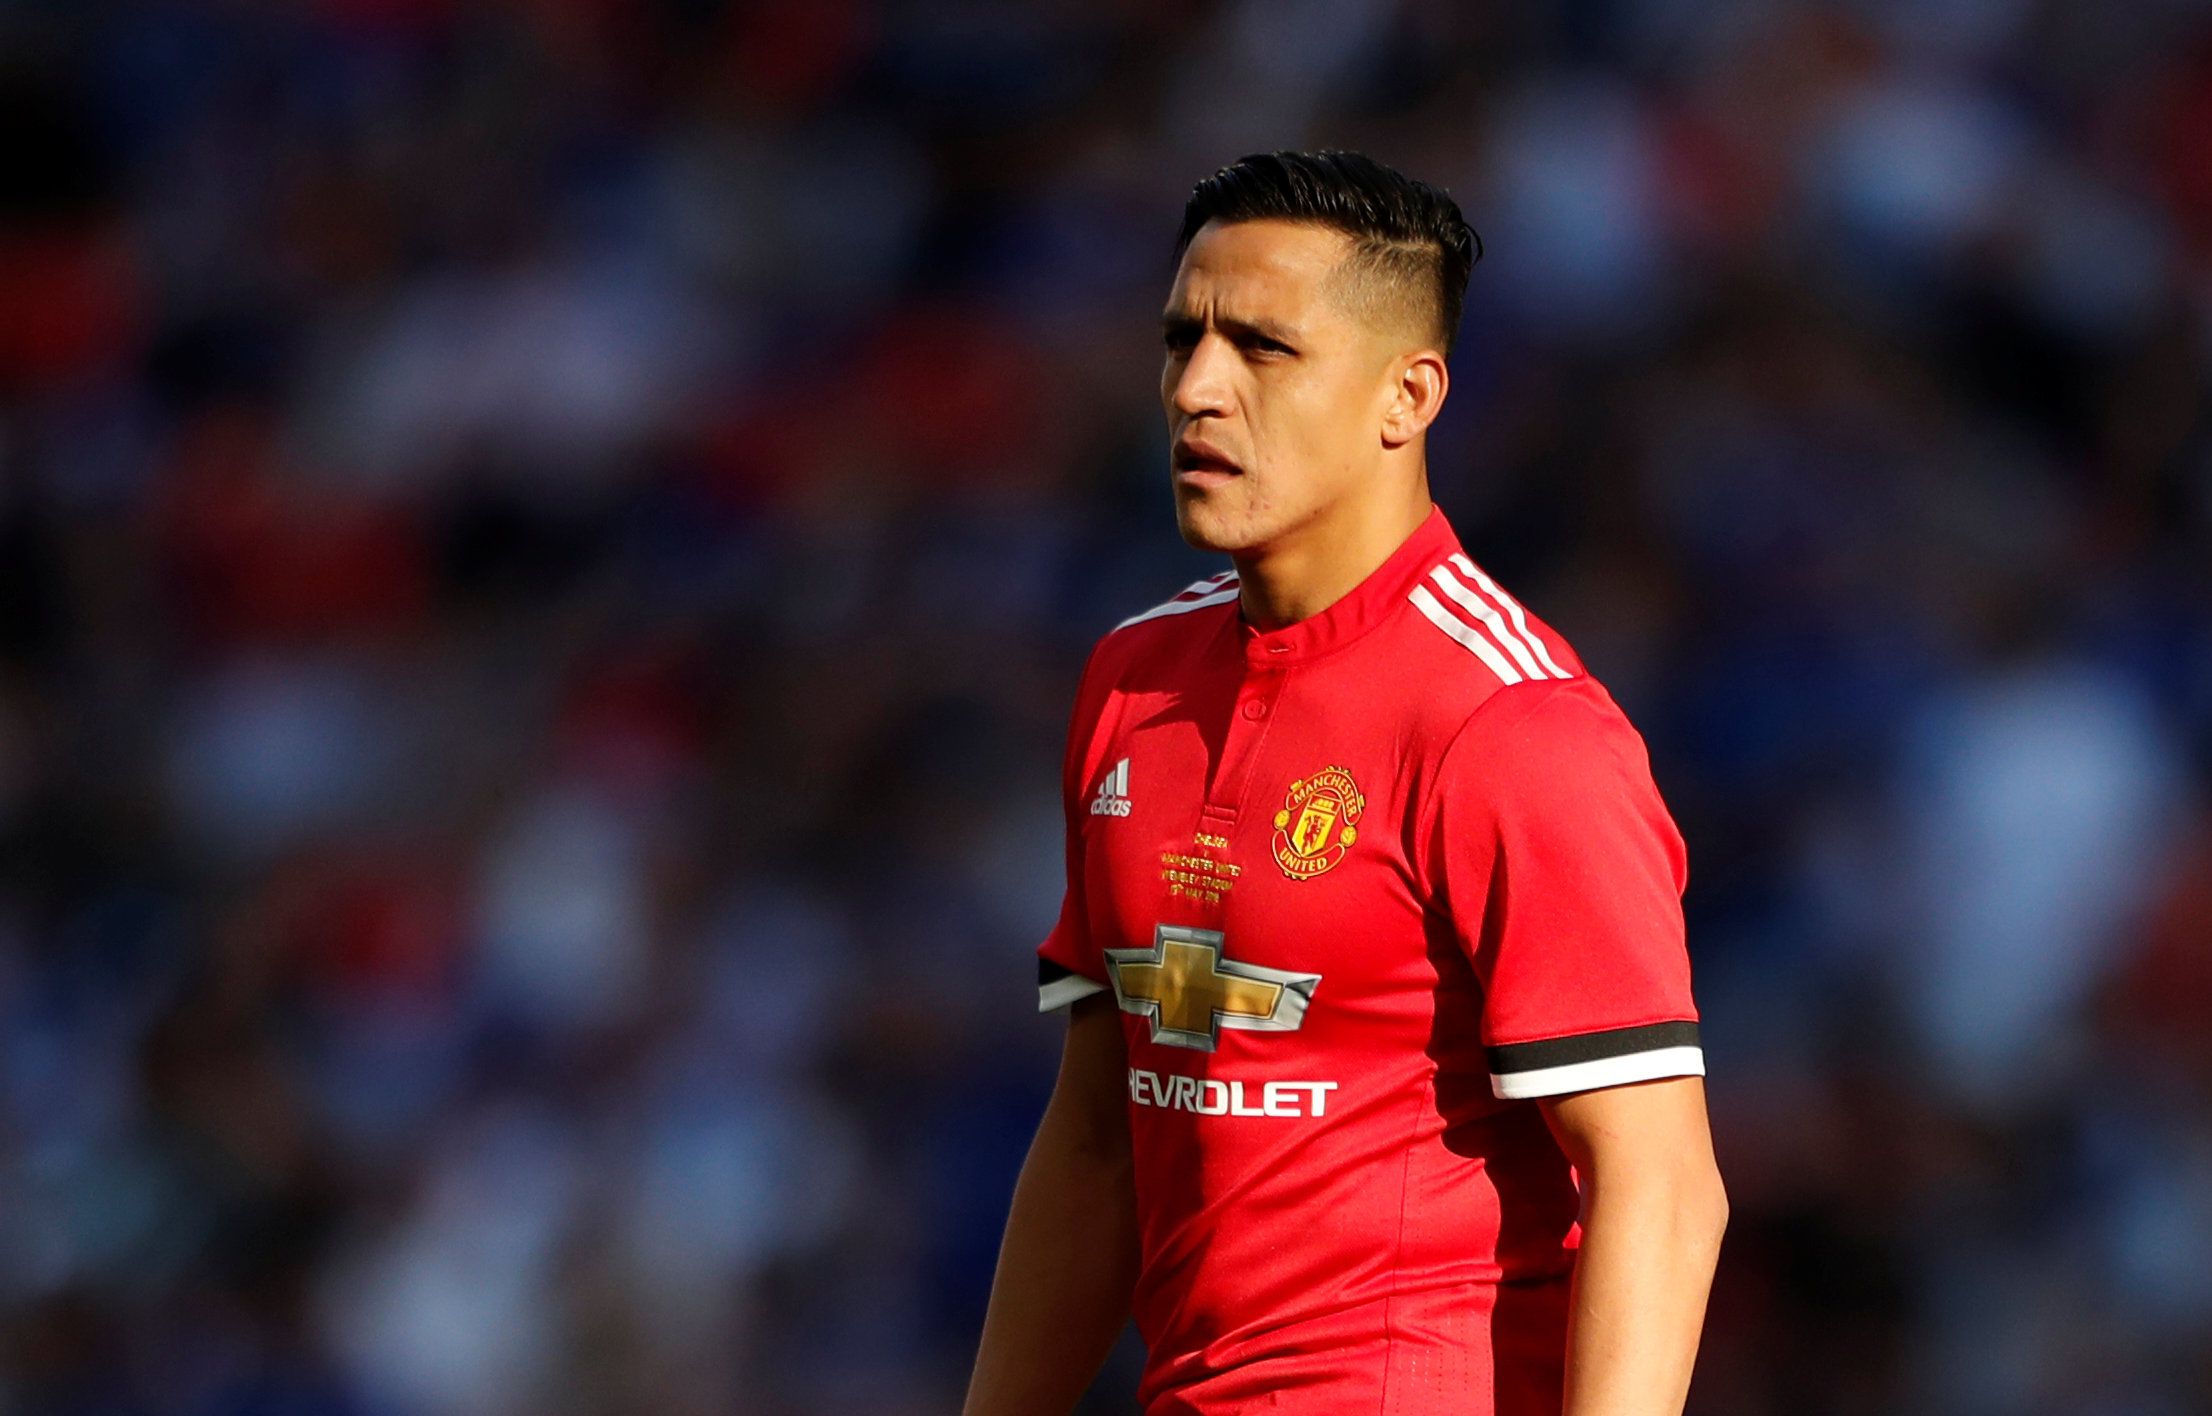 Soccer Football - FA Cup Final - Chelsea vs Manchester United - Wembley Stadium, London, Britain - May 19, 2018   Manchester United's Alexis Sanchez during the match    Action Images via Reuters/Lee Smith